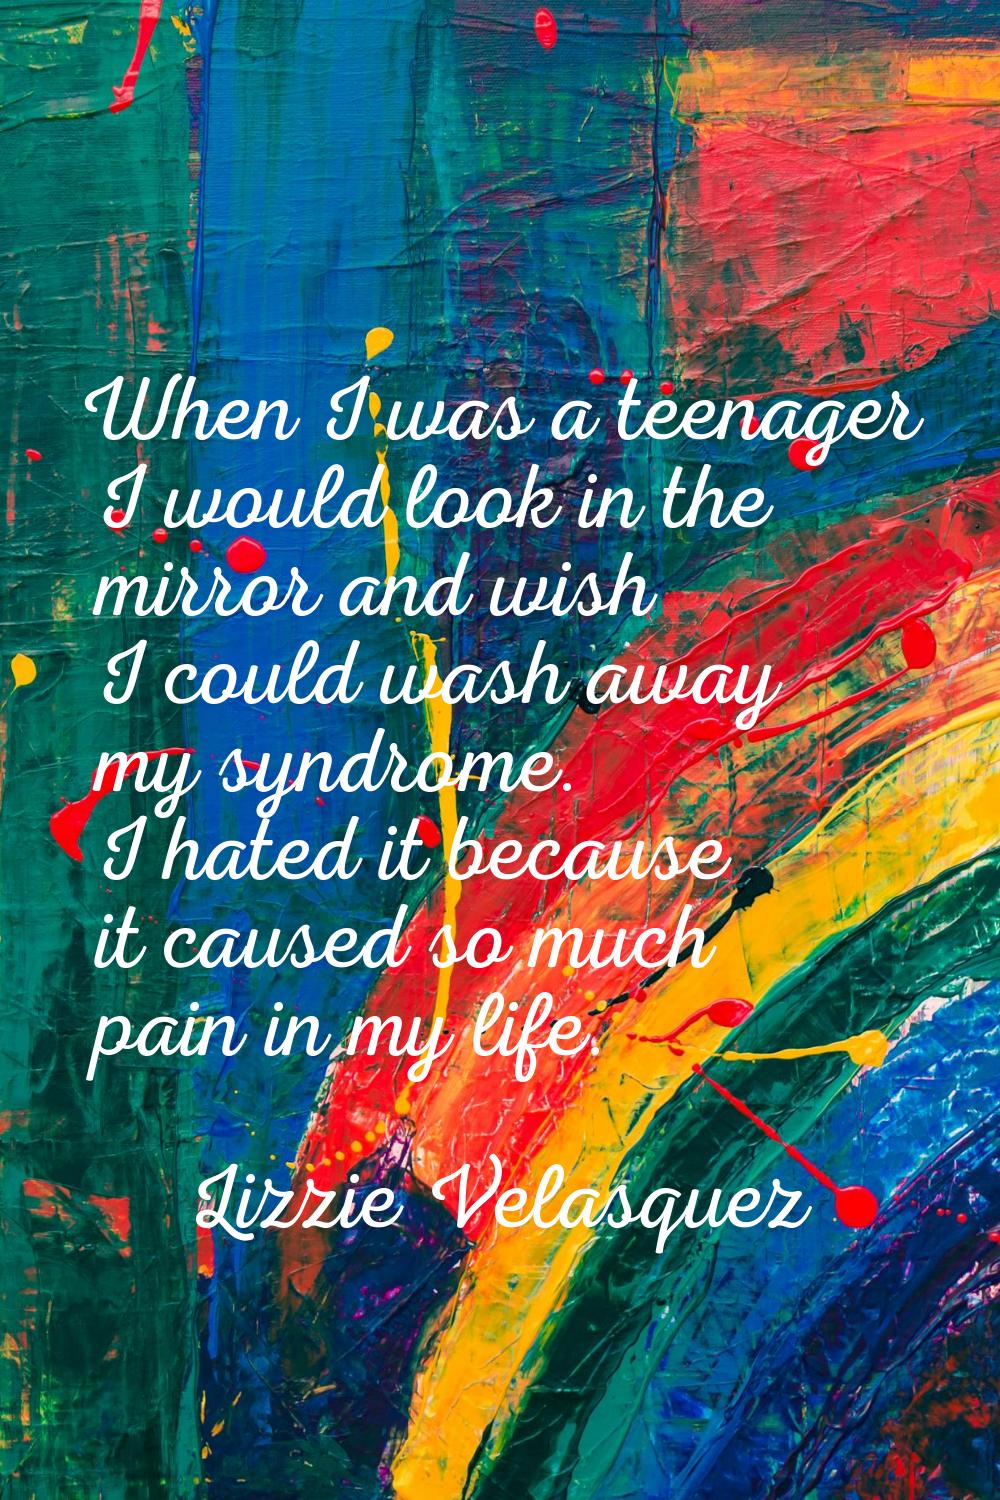 When I was a teenager I would look in the mirror and wish I could wash away my syndrome. I hated it